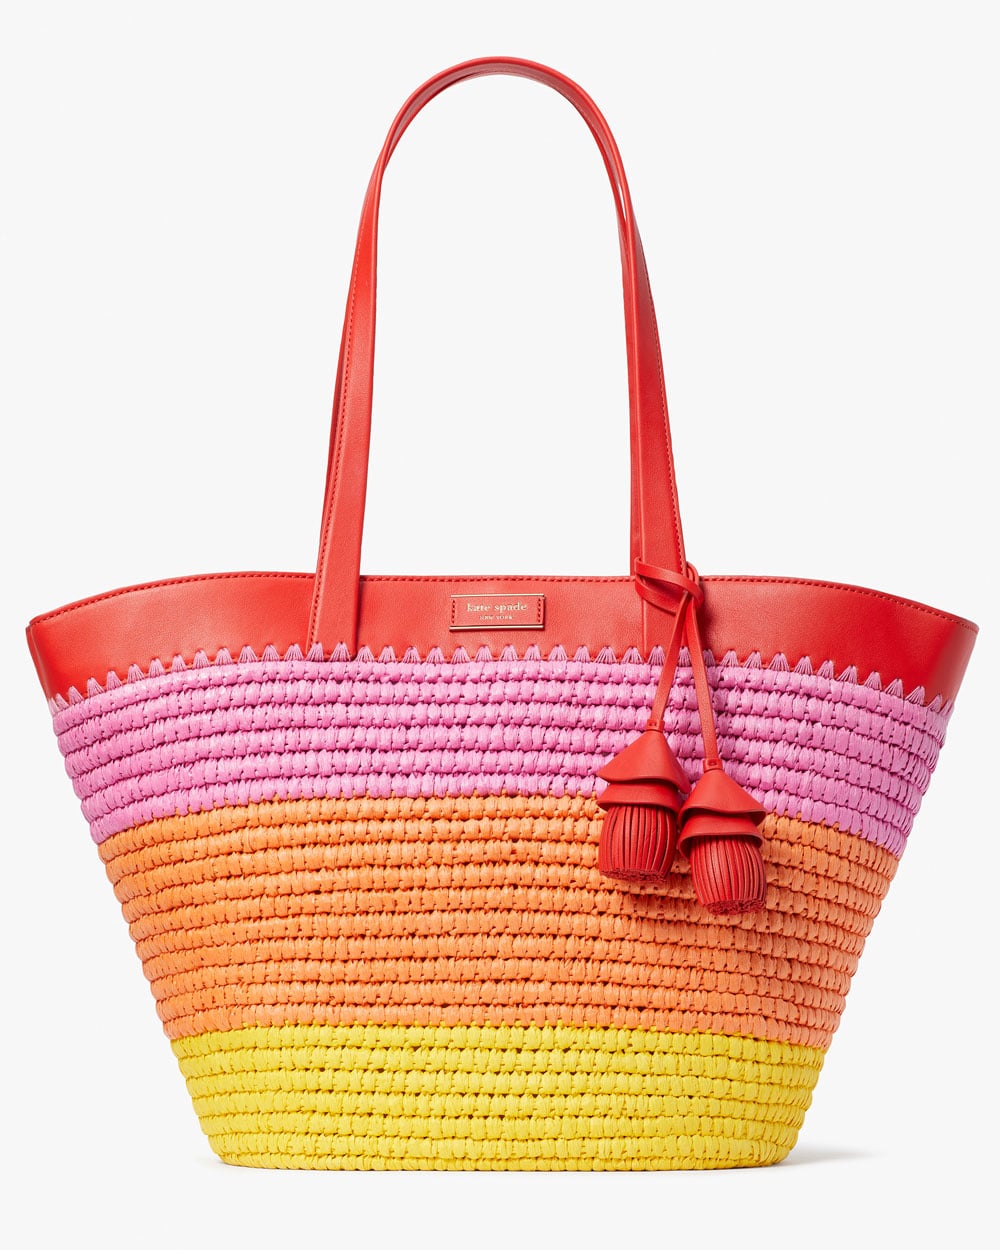 Looking for a Fun Summer Bag? Kate Spade’s Got You Covered - PurseBlog